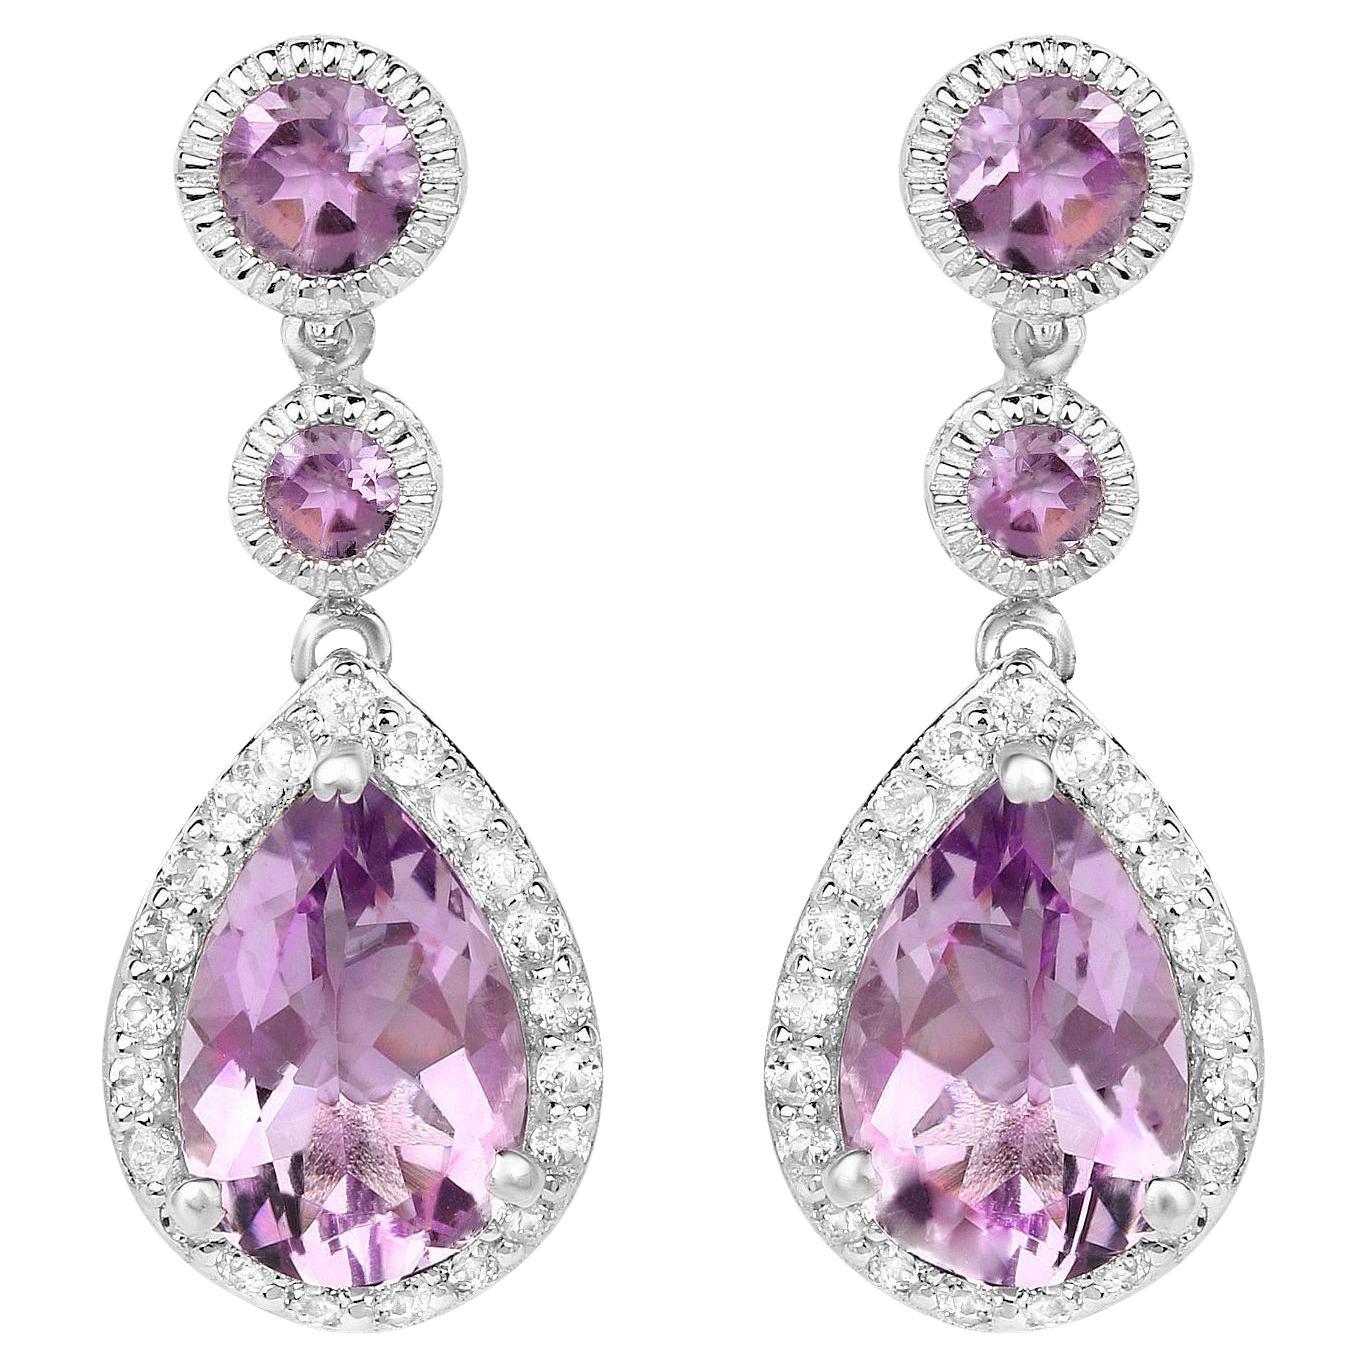 Amethyst Earrings With White Topazes 7.16 Carats Rhodium Plated Sterling Silver For Sale